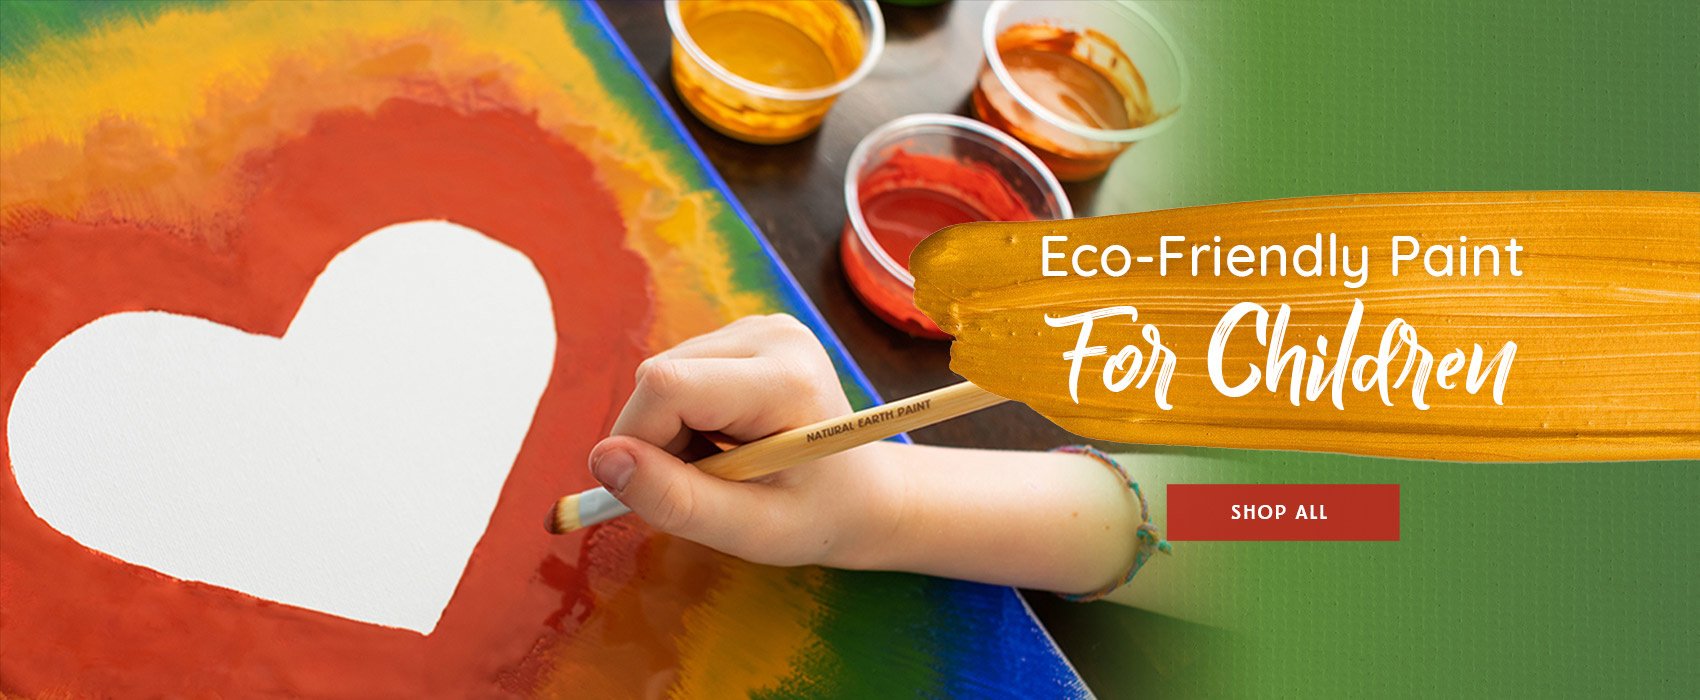 Natural Earth Paint  Complete ecological oil paint set includes 10 mineral  pigments - Natural Earth Paint Europe